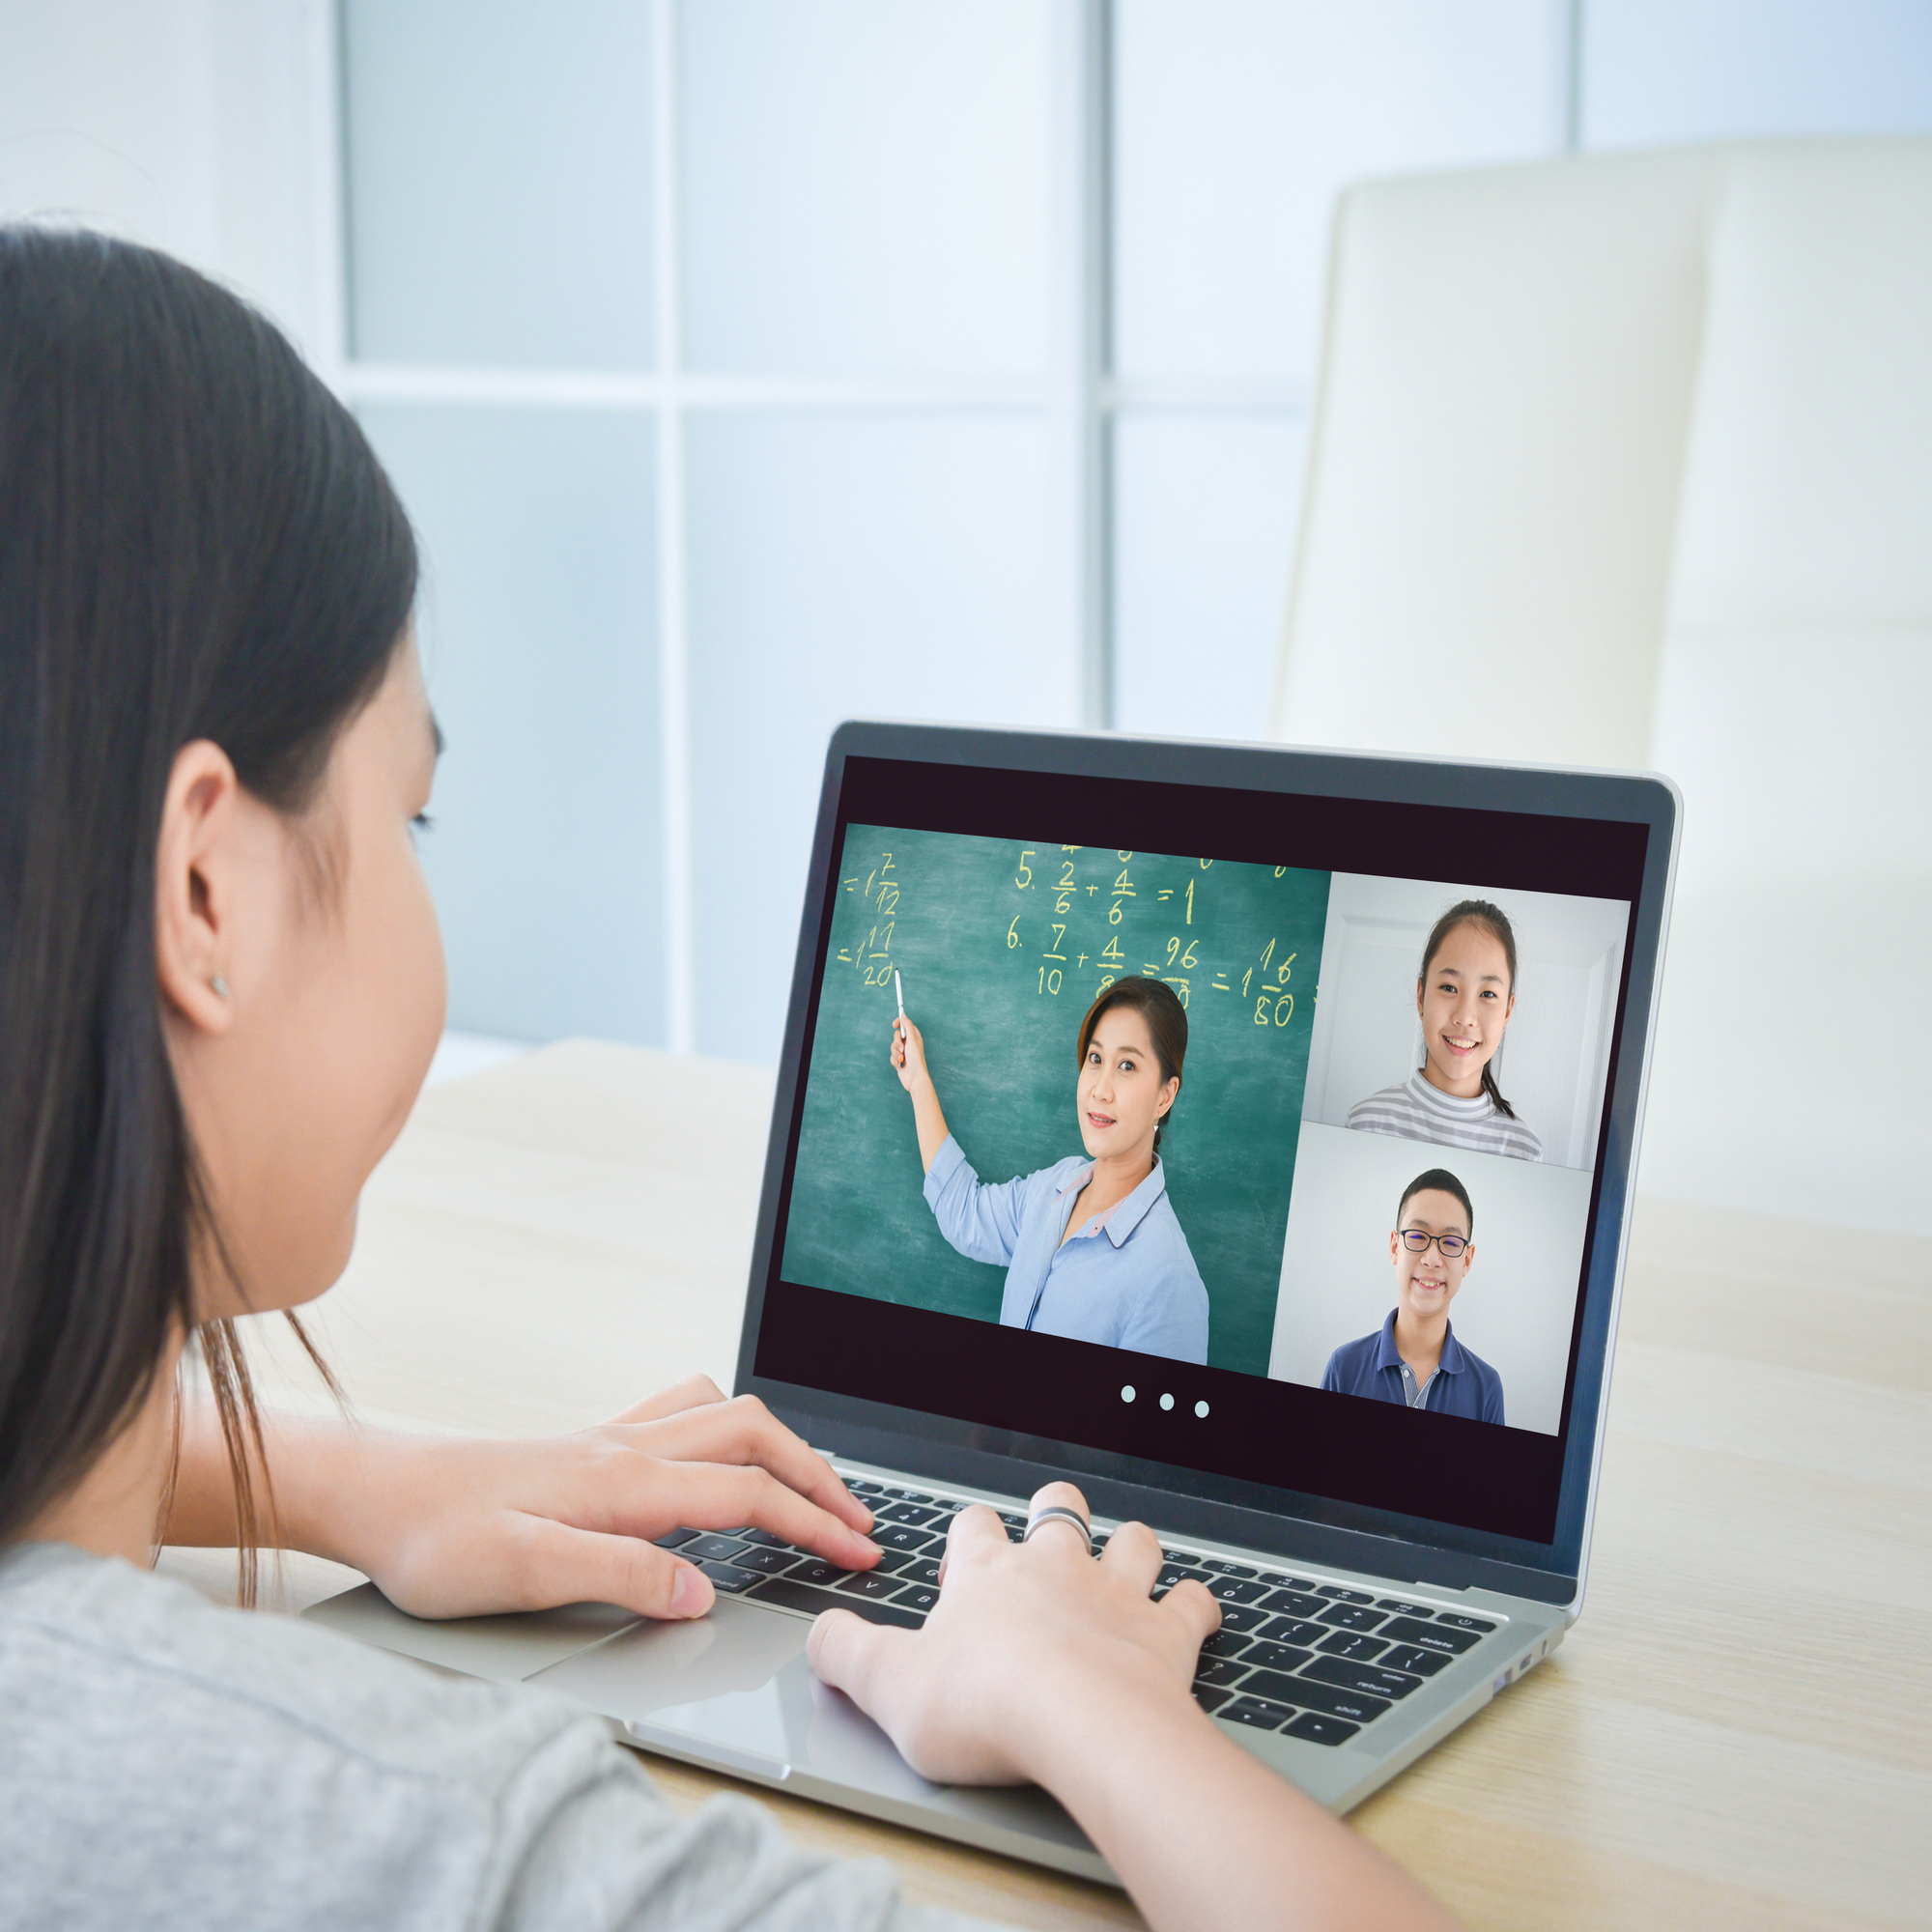 The importance of openness and certification of distance education